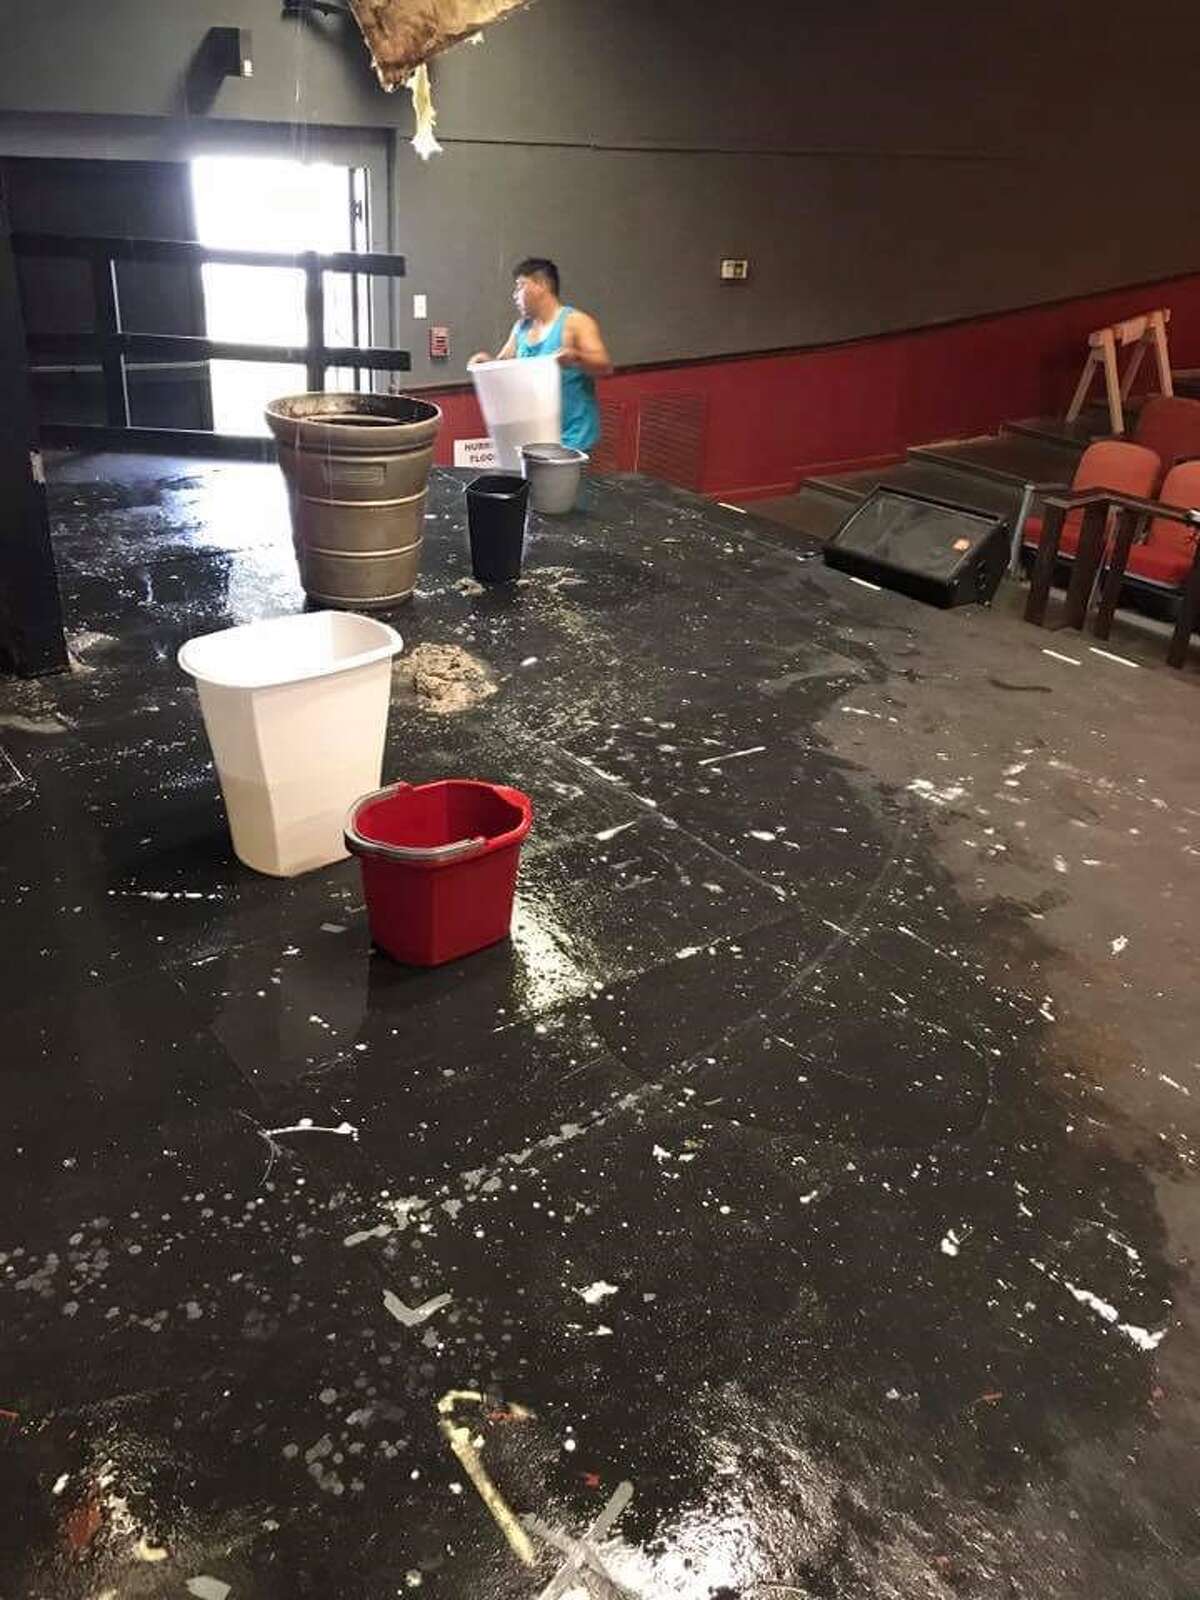 OrangeÂ Community Players, Inc. board members are working to raise $35,000 to replace half of the theater's roof after recent storms tore through it.